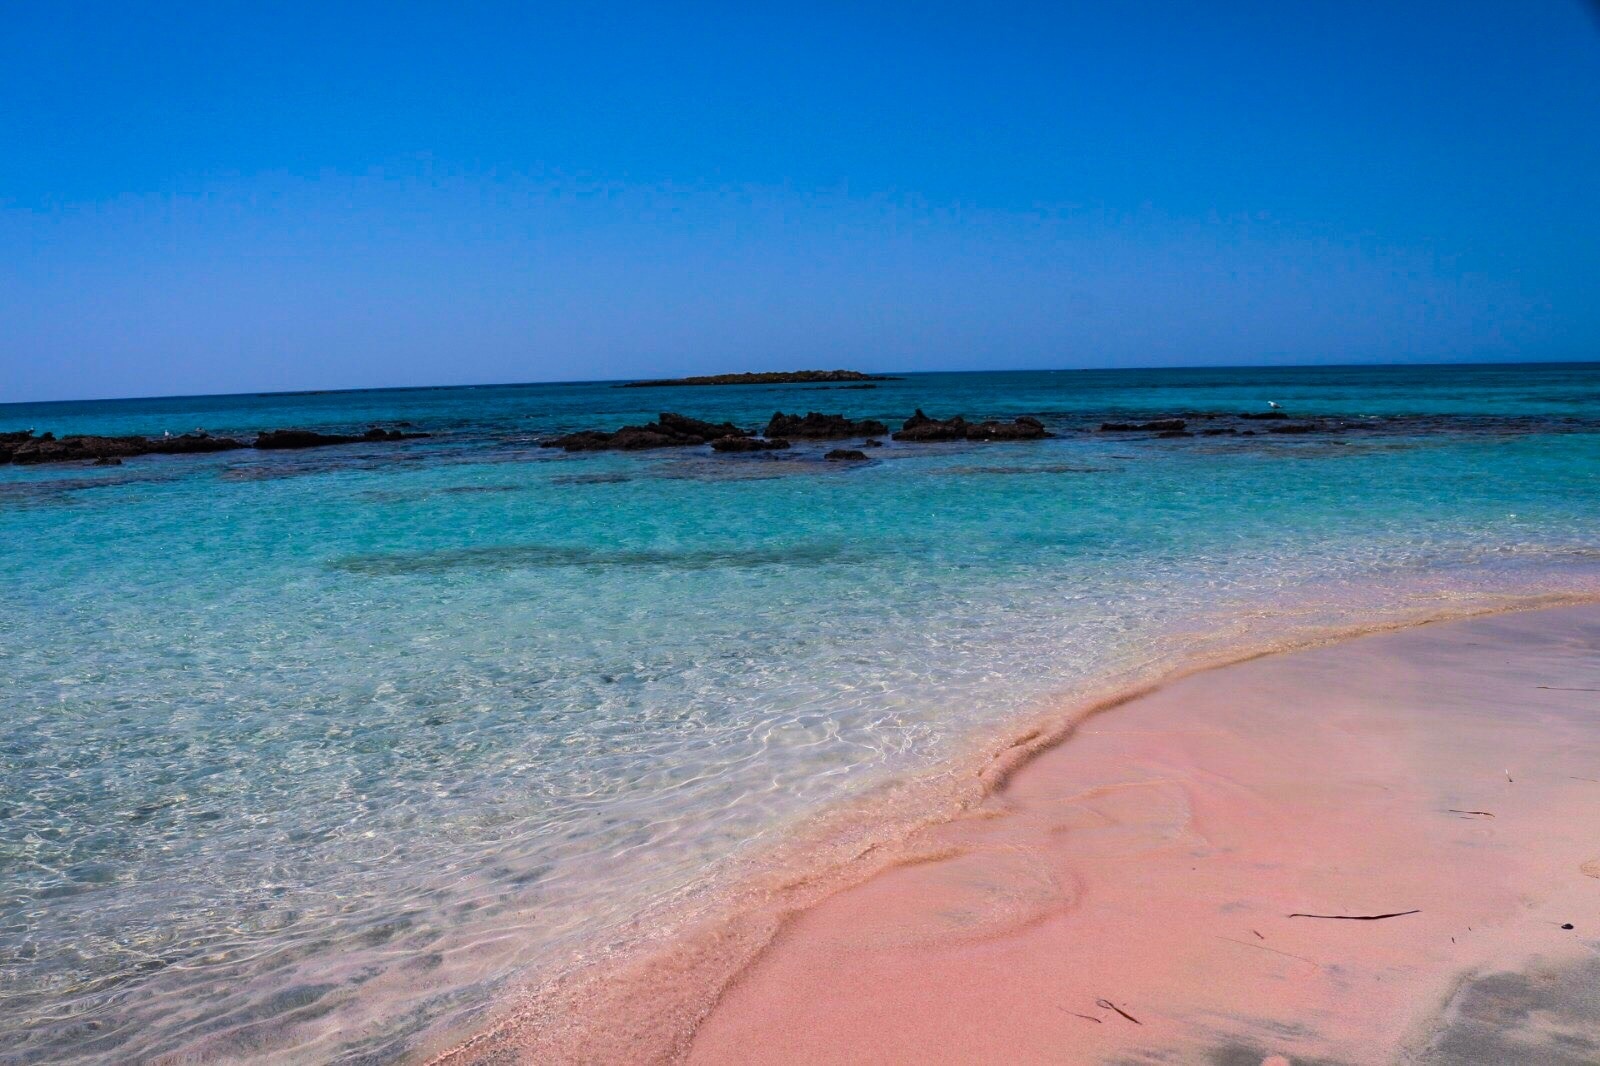 Elafonissi Beach - one of the places in the world where you find Red sand beach!!! 